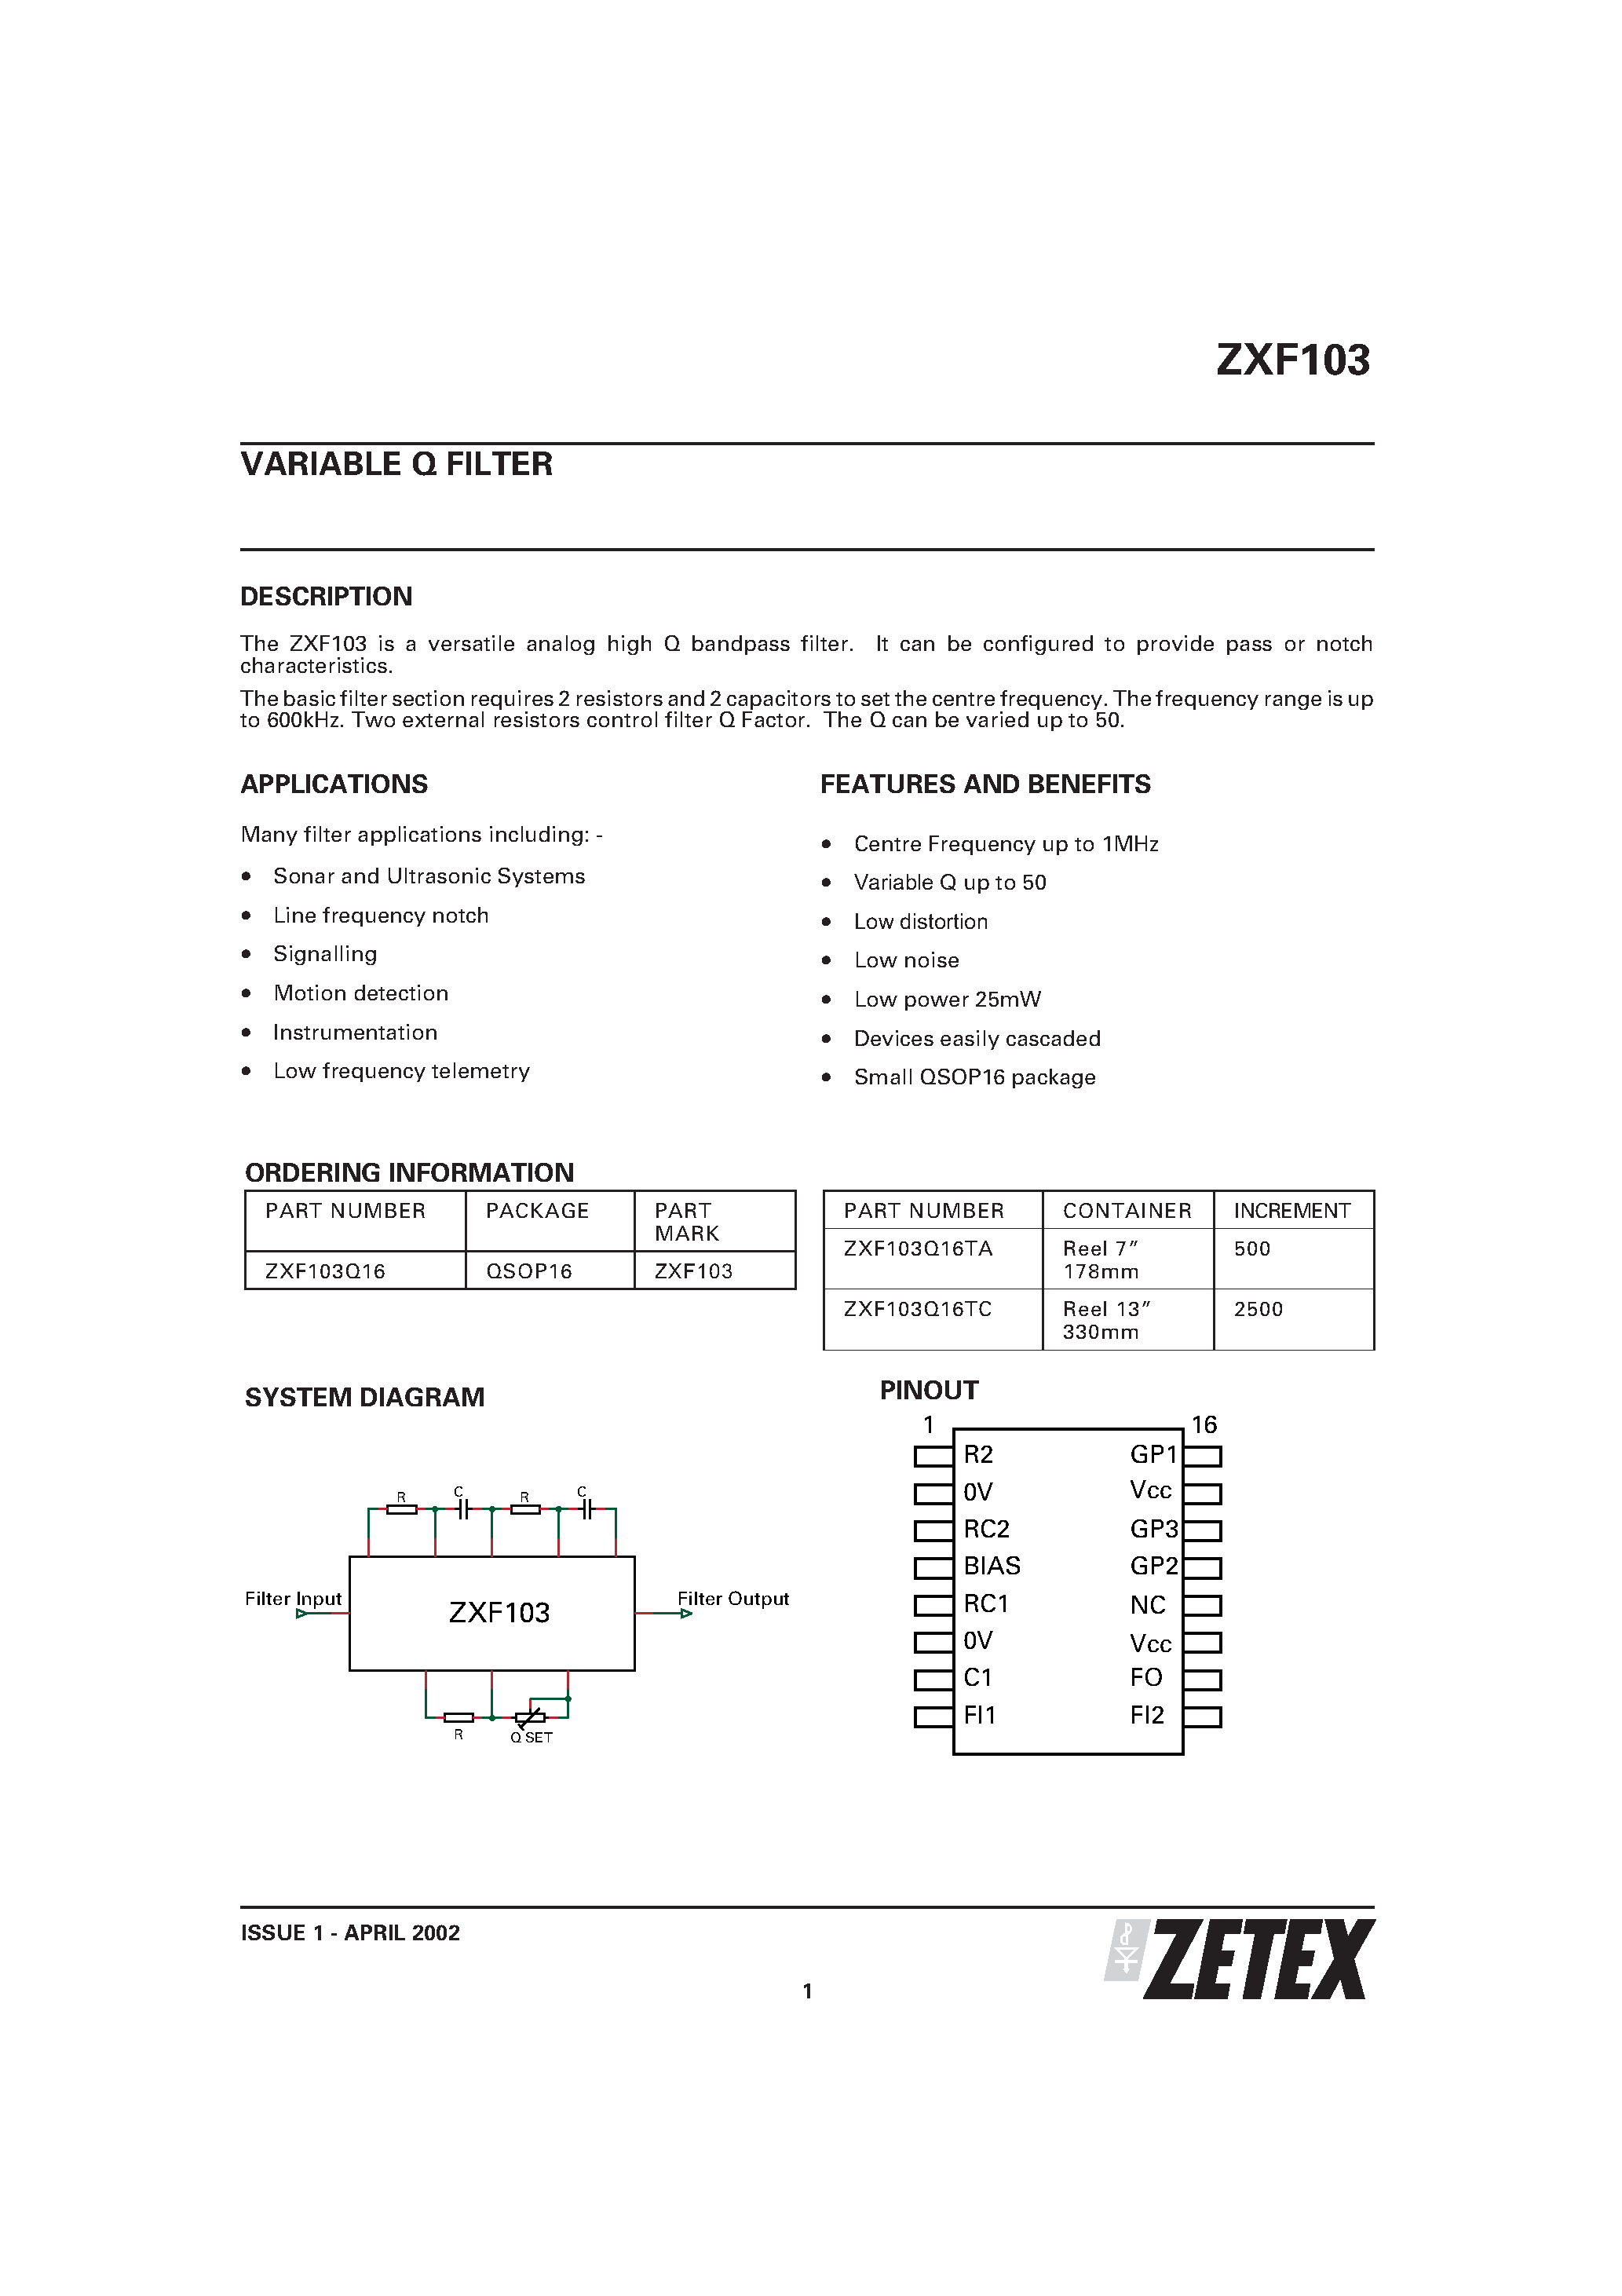 Datasheet ZXF103 - VARIABLE Q FILTER page 1